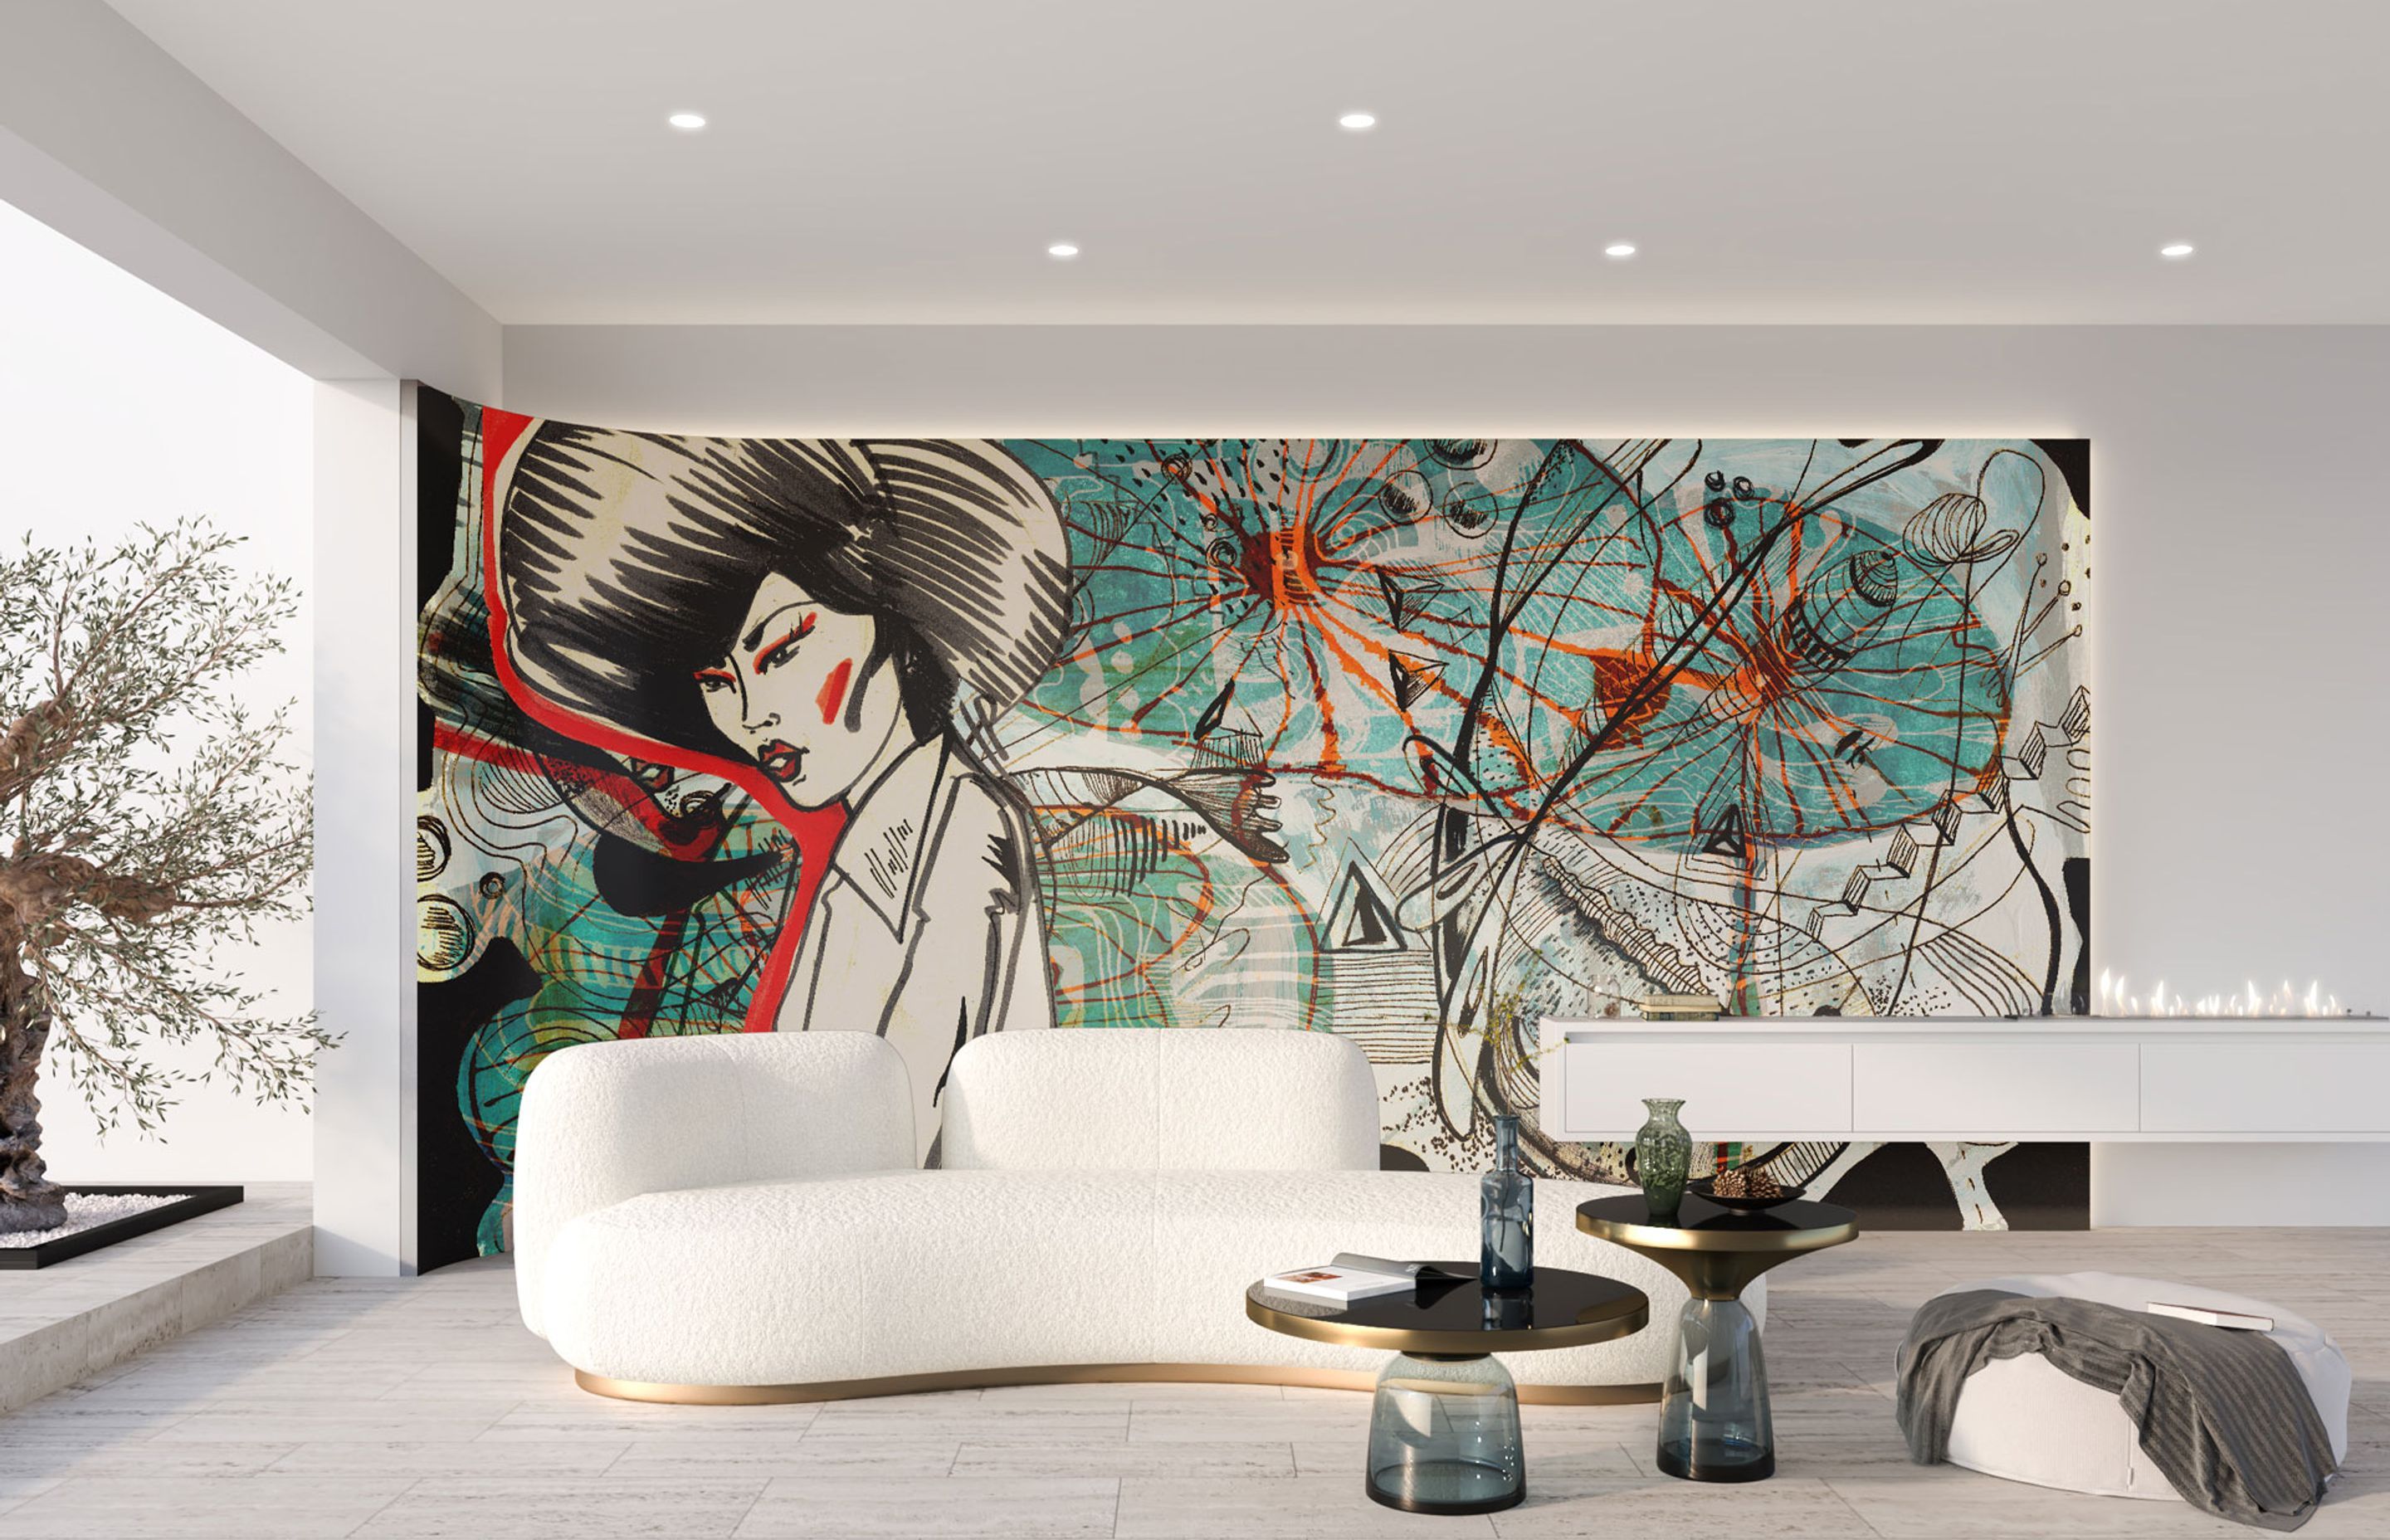 Walls Beyond murals allow you to transform your walls into works of art.